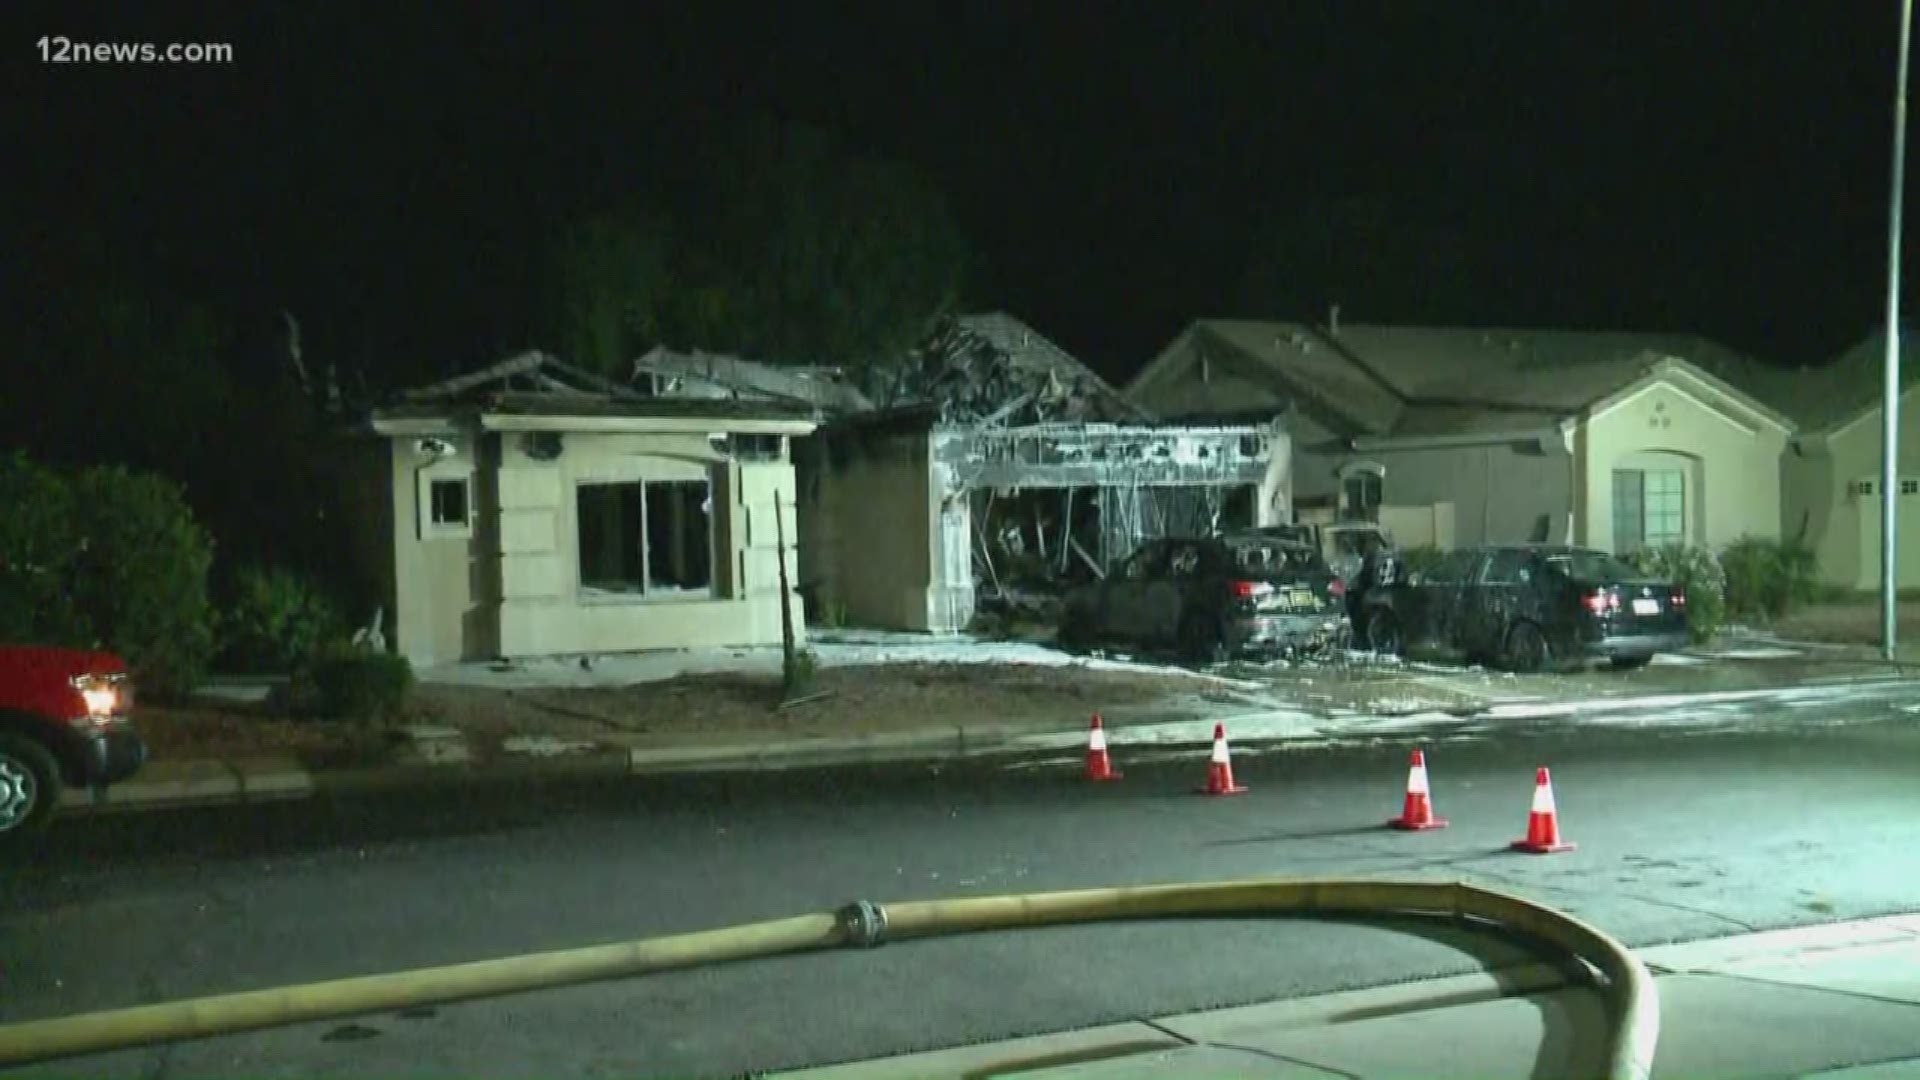 Chandler fire said the home near Riggs and Lindsay roads was a total loss.